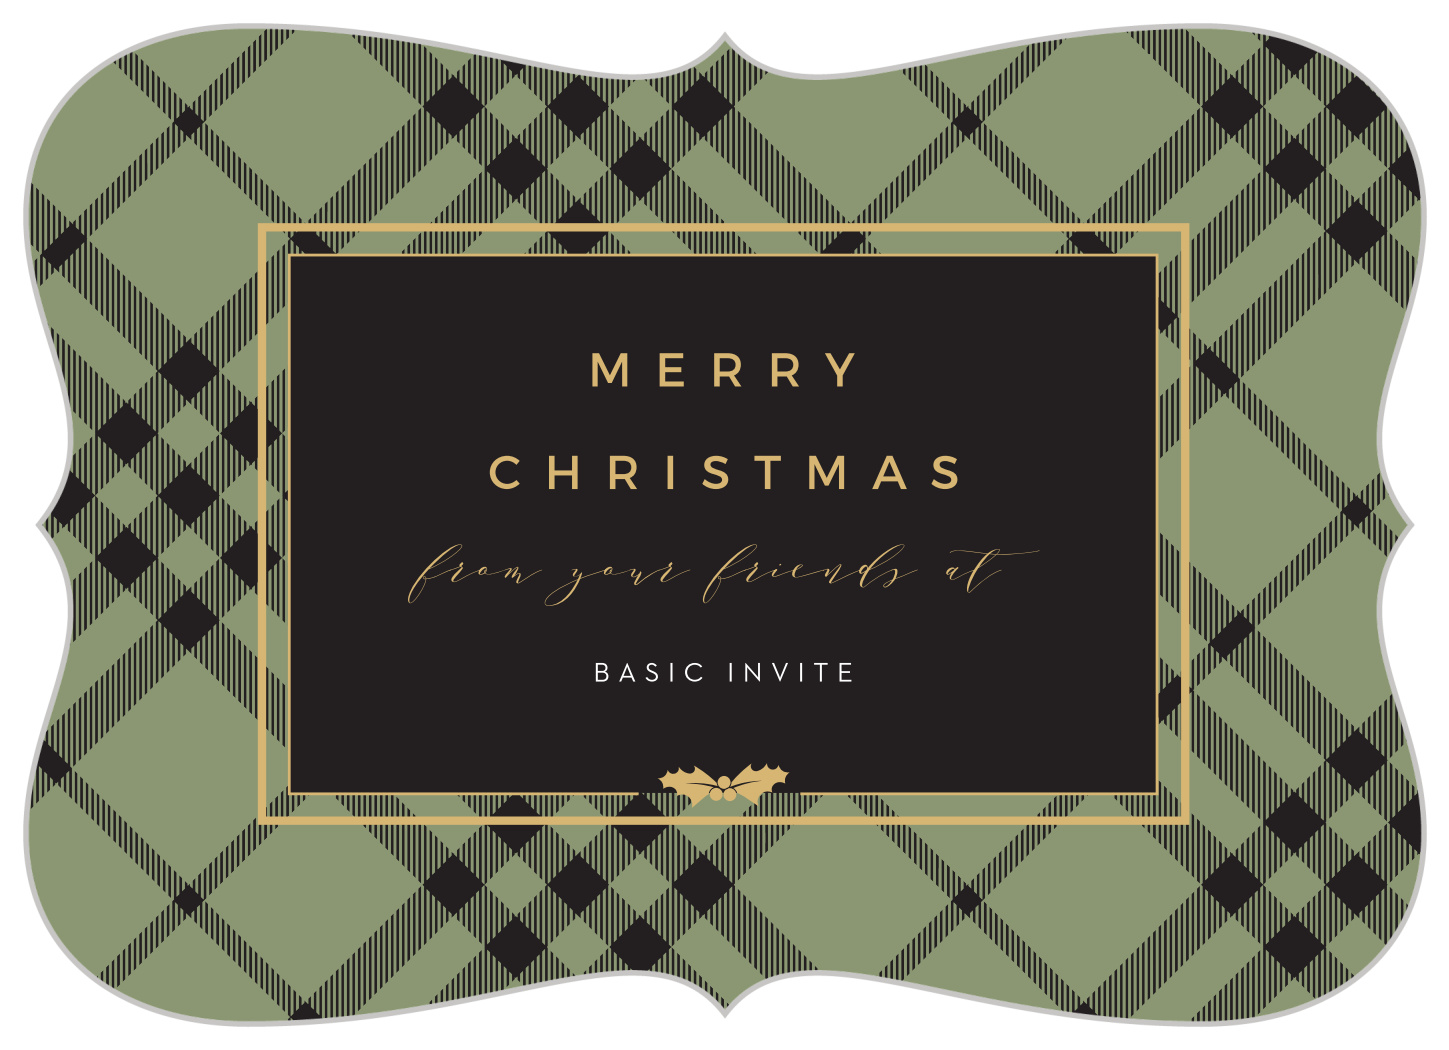 Classic Plaid Corporate Holiday Cards